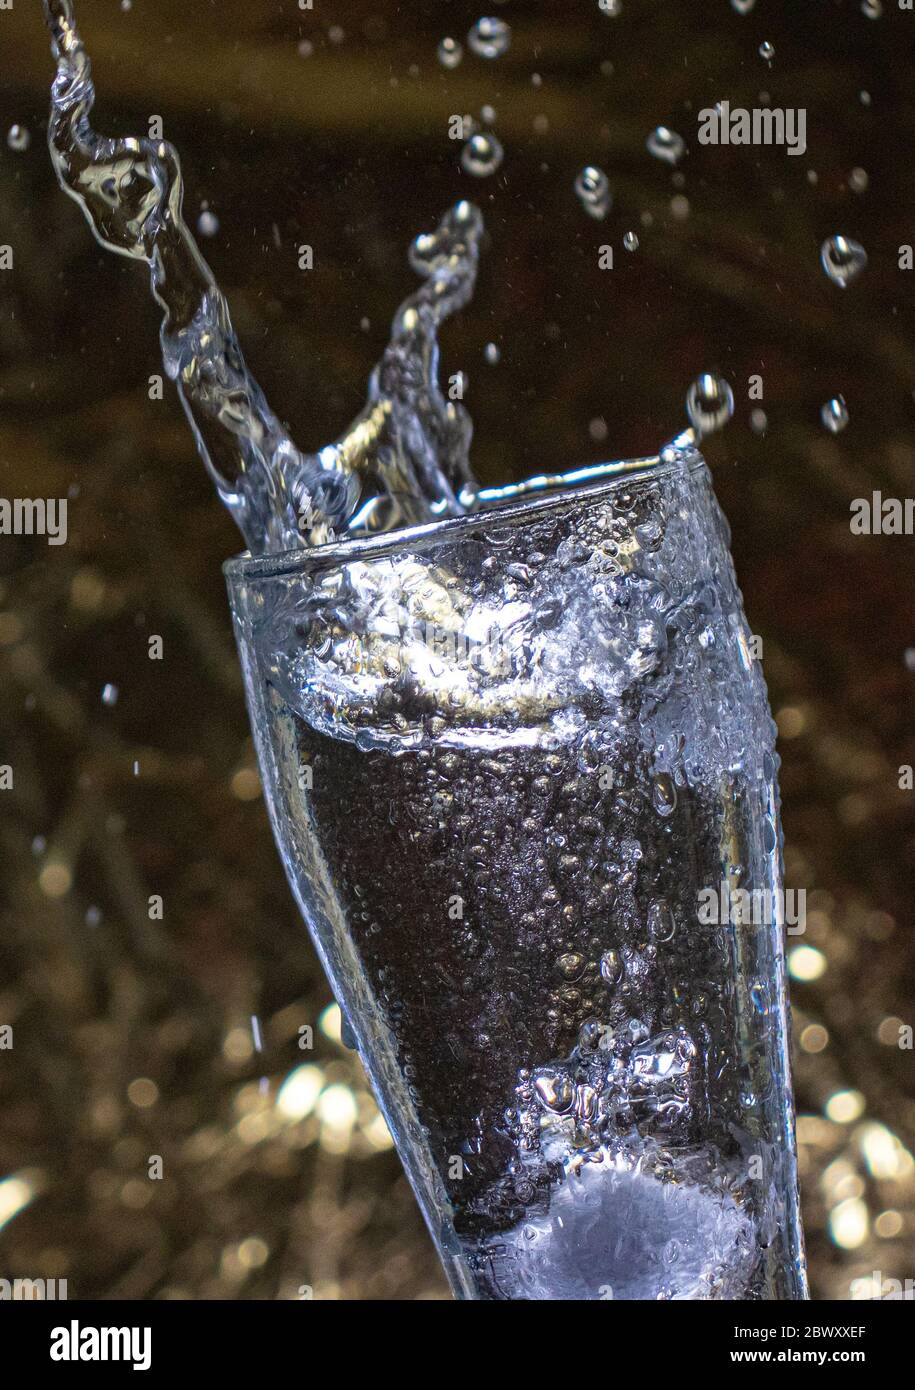 Small and big ice cube with water drops Stock Photo - Alamy